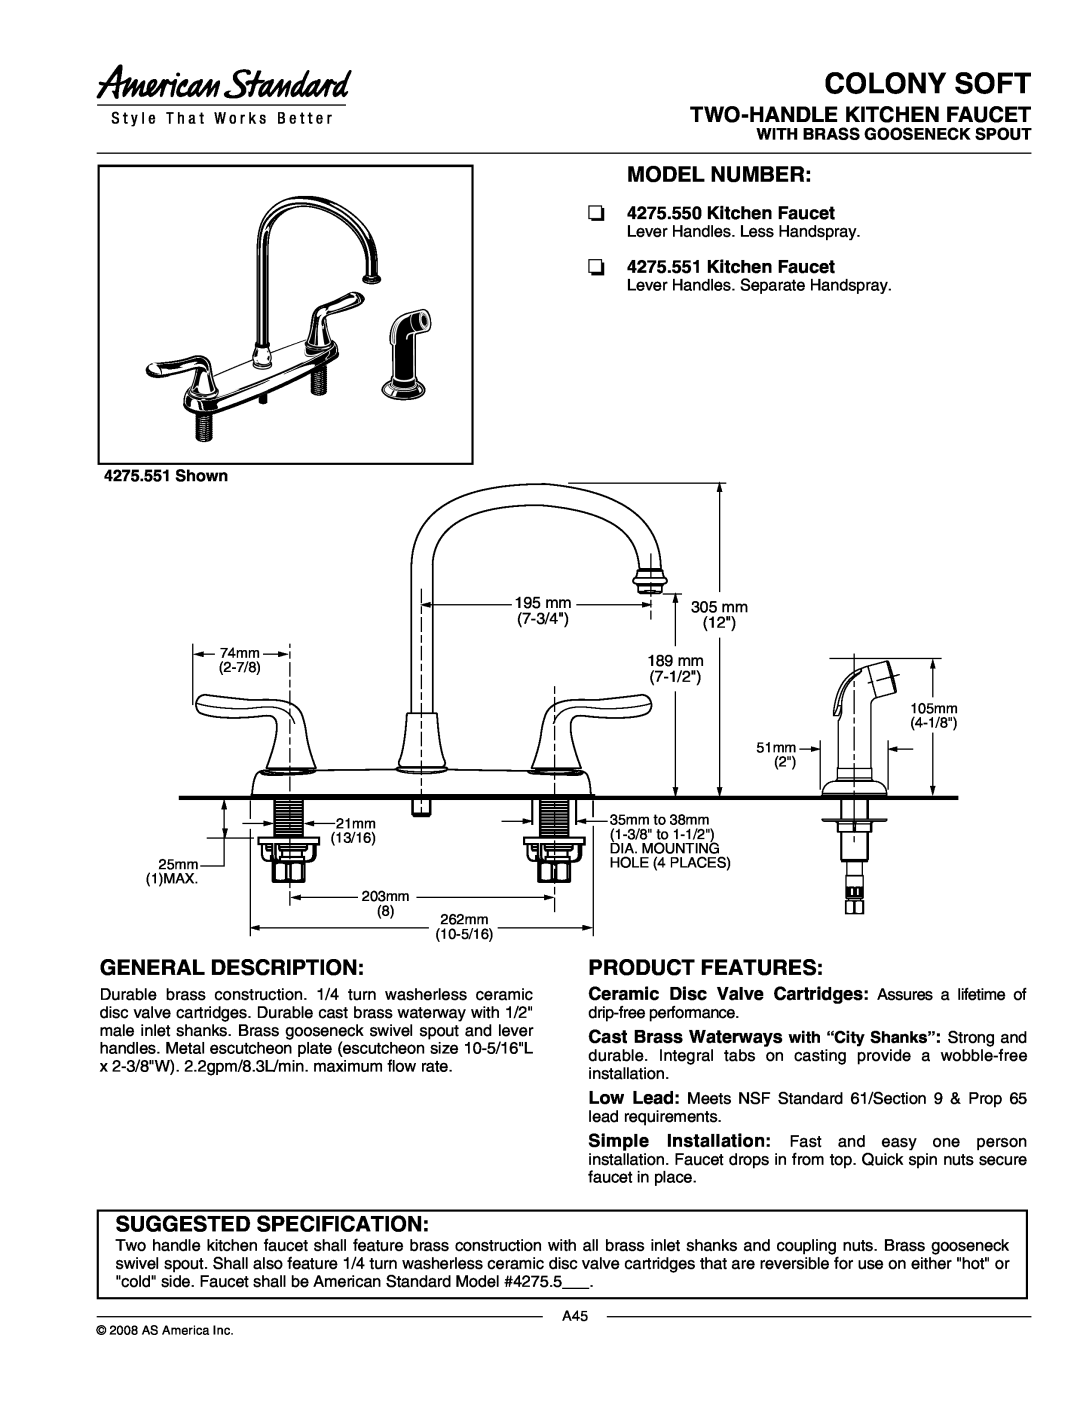 American Standard 4275.550 manual Colony Soft, Two-Handle Kitchen Faucet, Model Number, General Description, Shown 